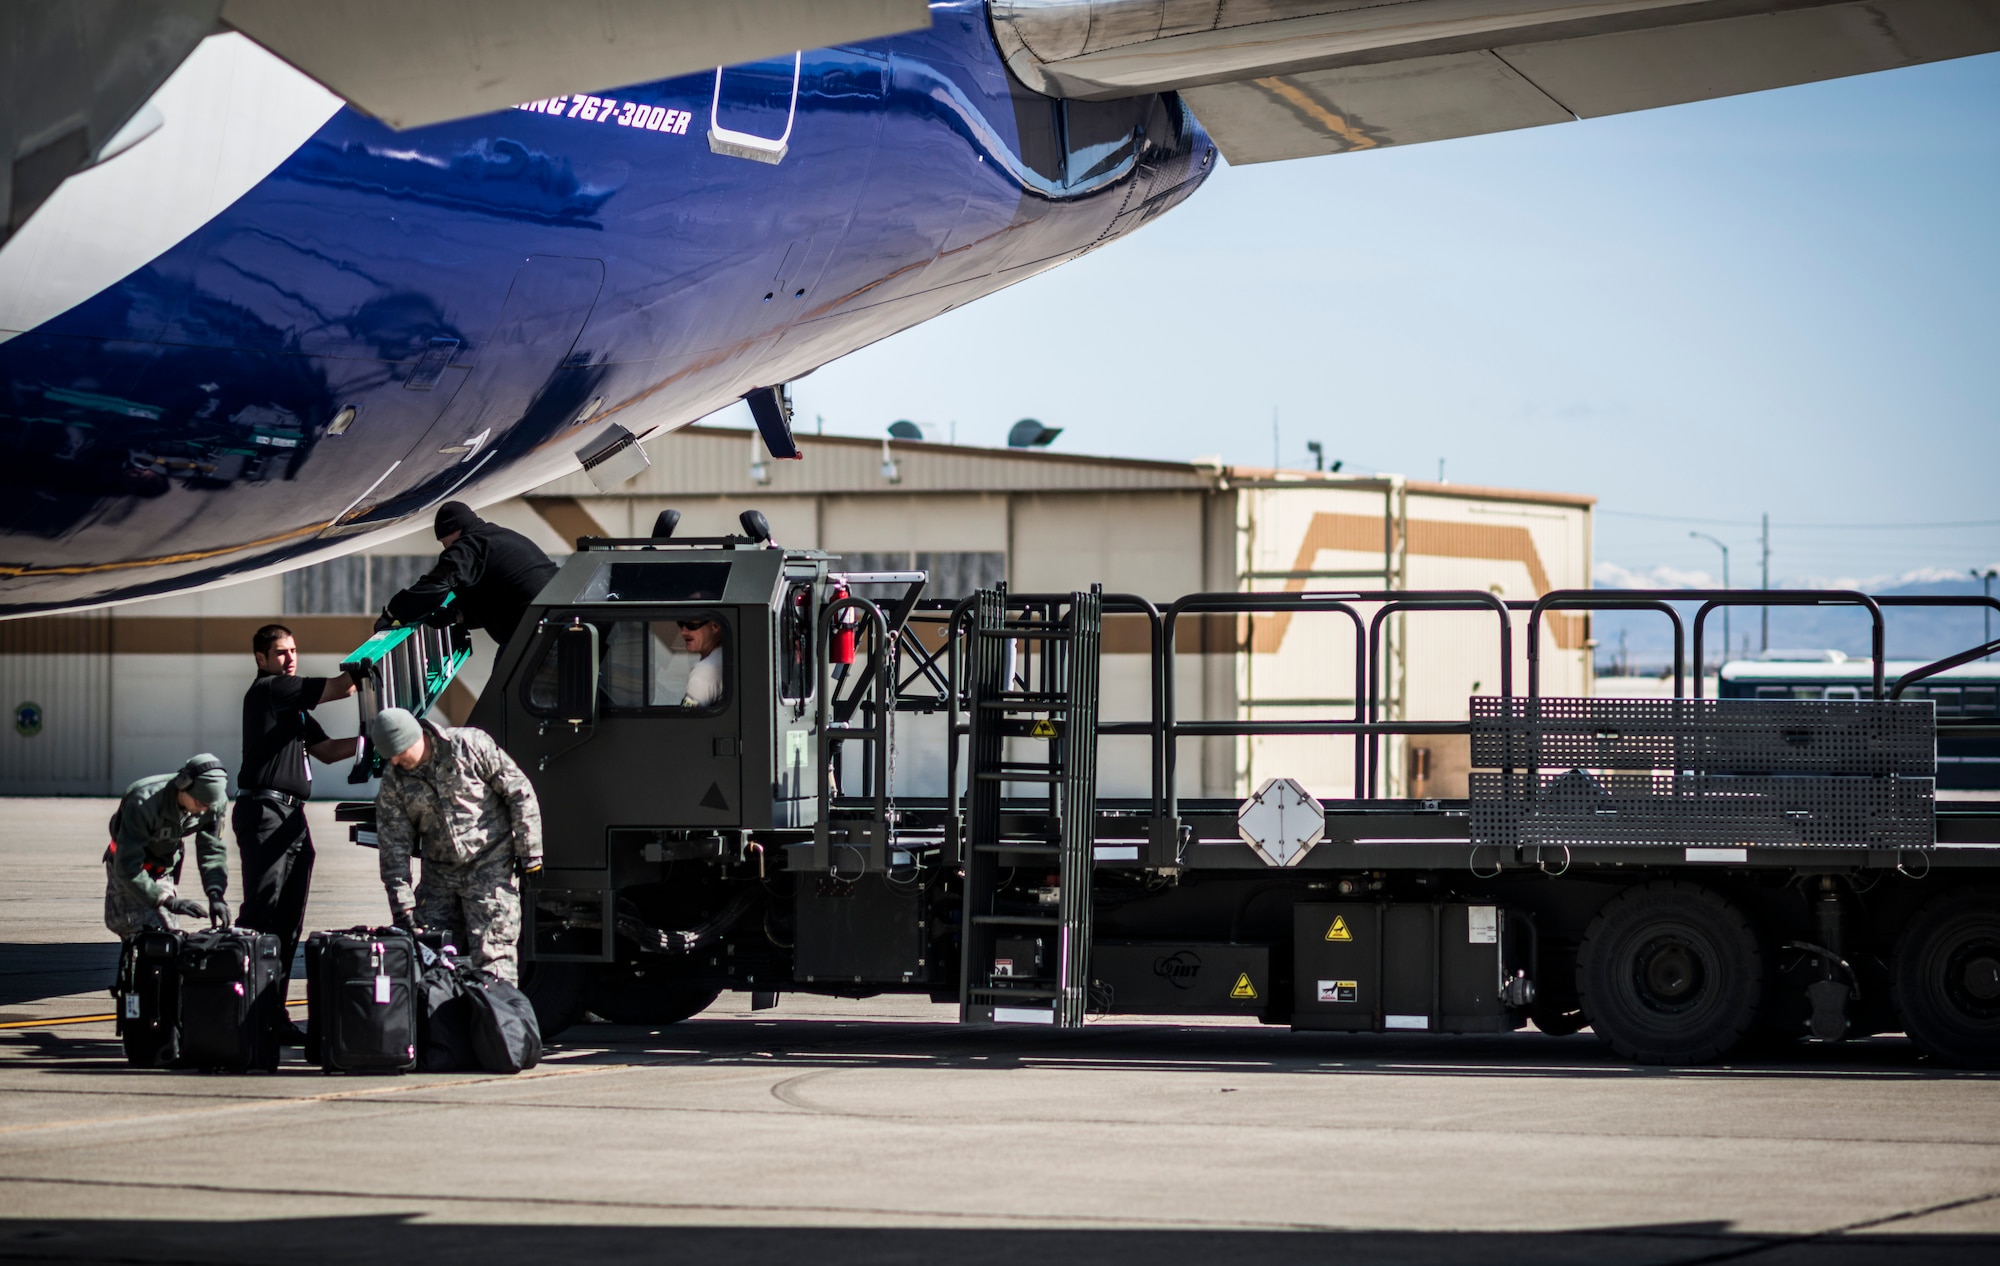 Airmen take care of the final bags to load onto an aircraft at Mountain Home Air Force Base, Idaho, April 23, 2013. The aircraft carried Airmen deploying in support of Operation Enduring Freedom. (U.S. Air Force photo/Tech. Sgt. Samuel Morse)